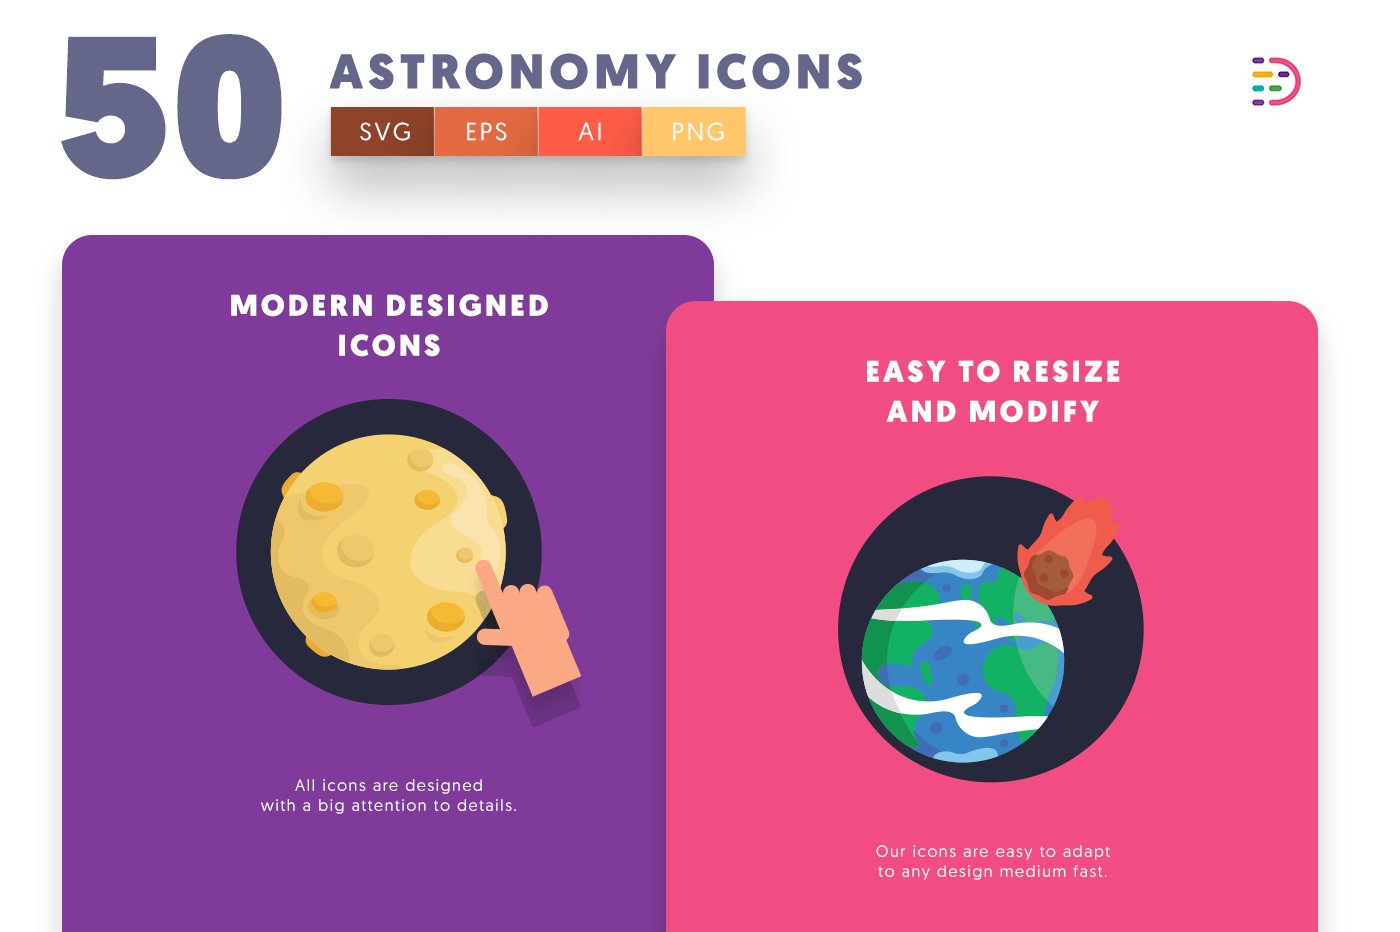 astronomy icons cover copy 5 475